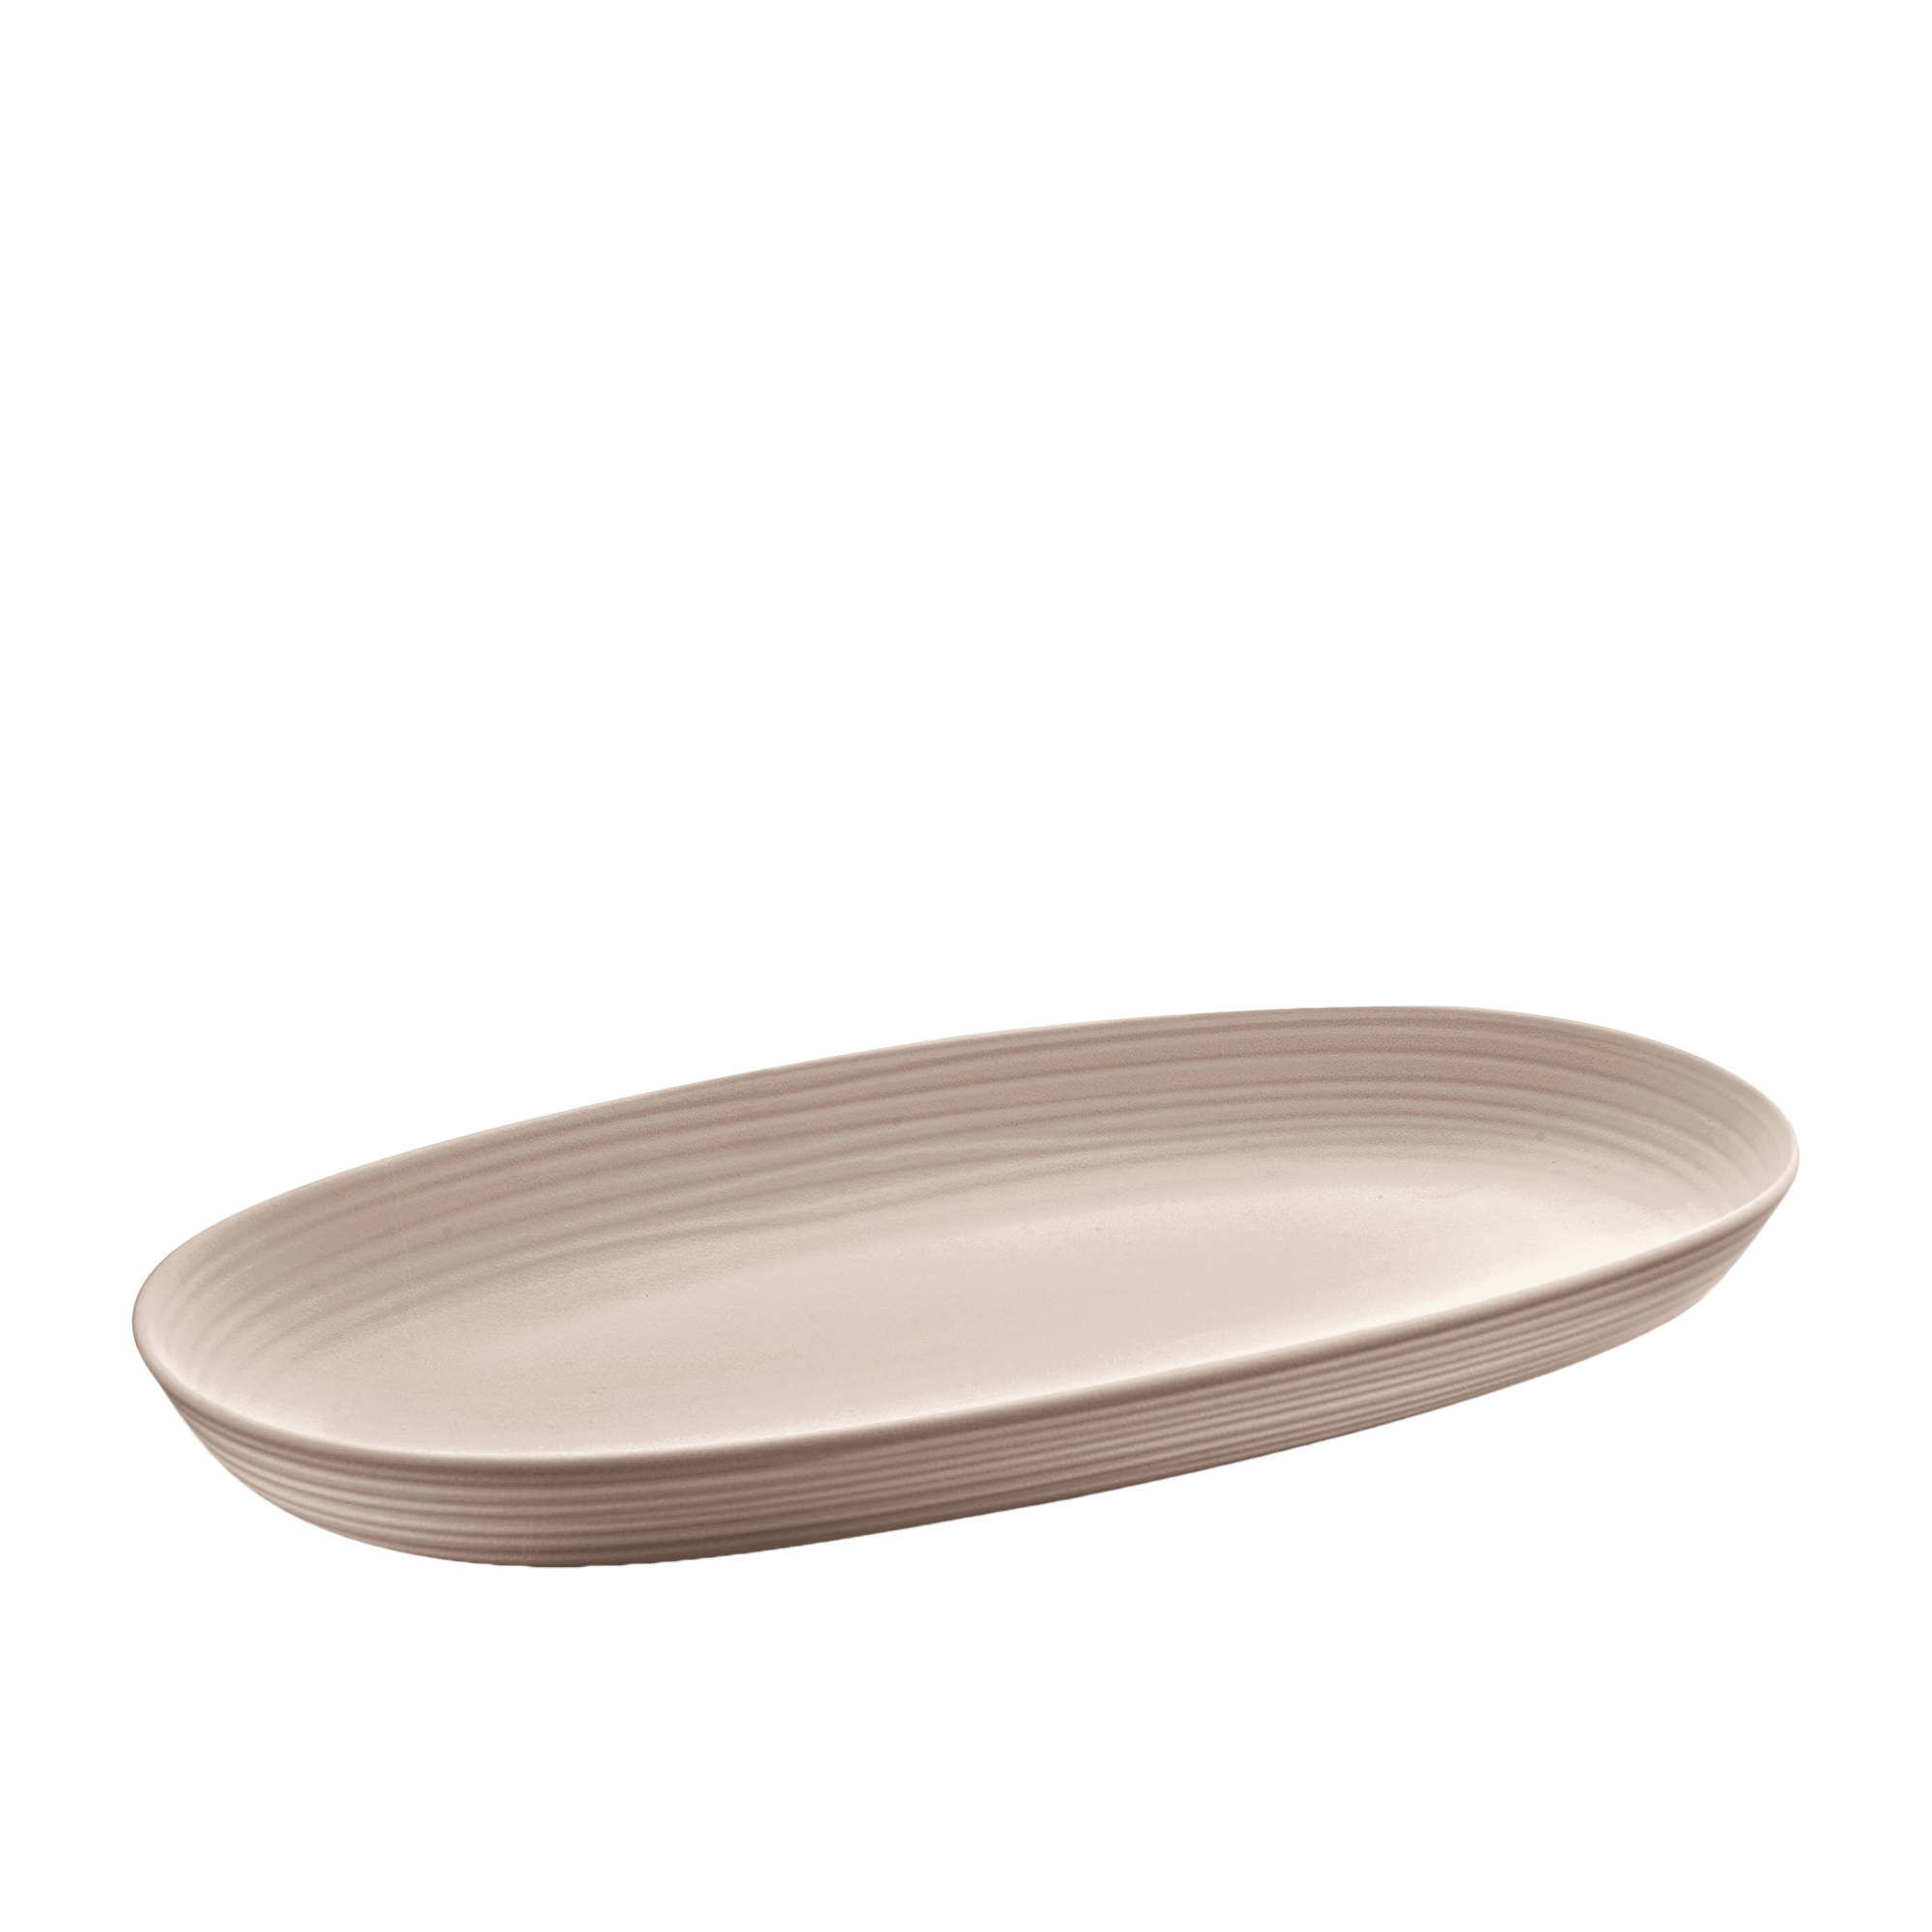 Guzzini Earth Tierra Serving Tray 41x23 Taupe Image 1